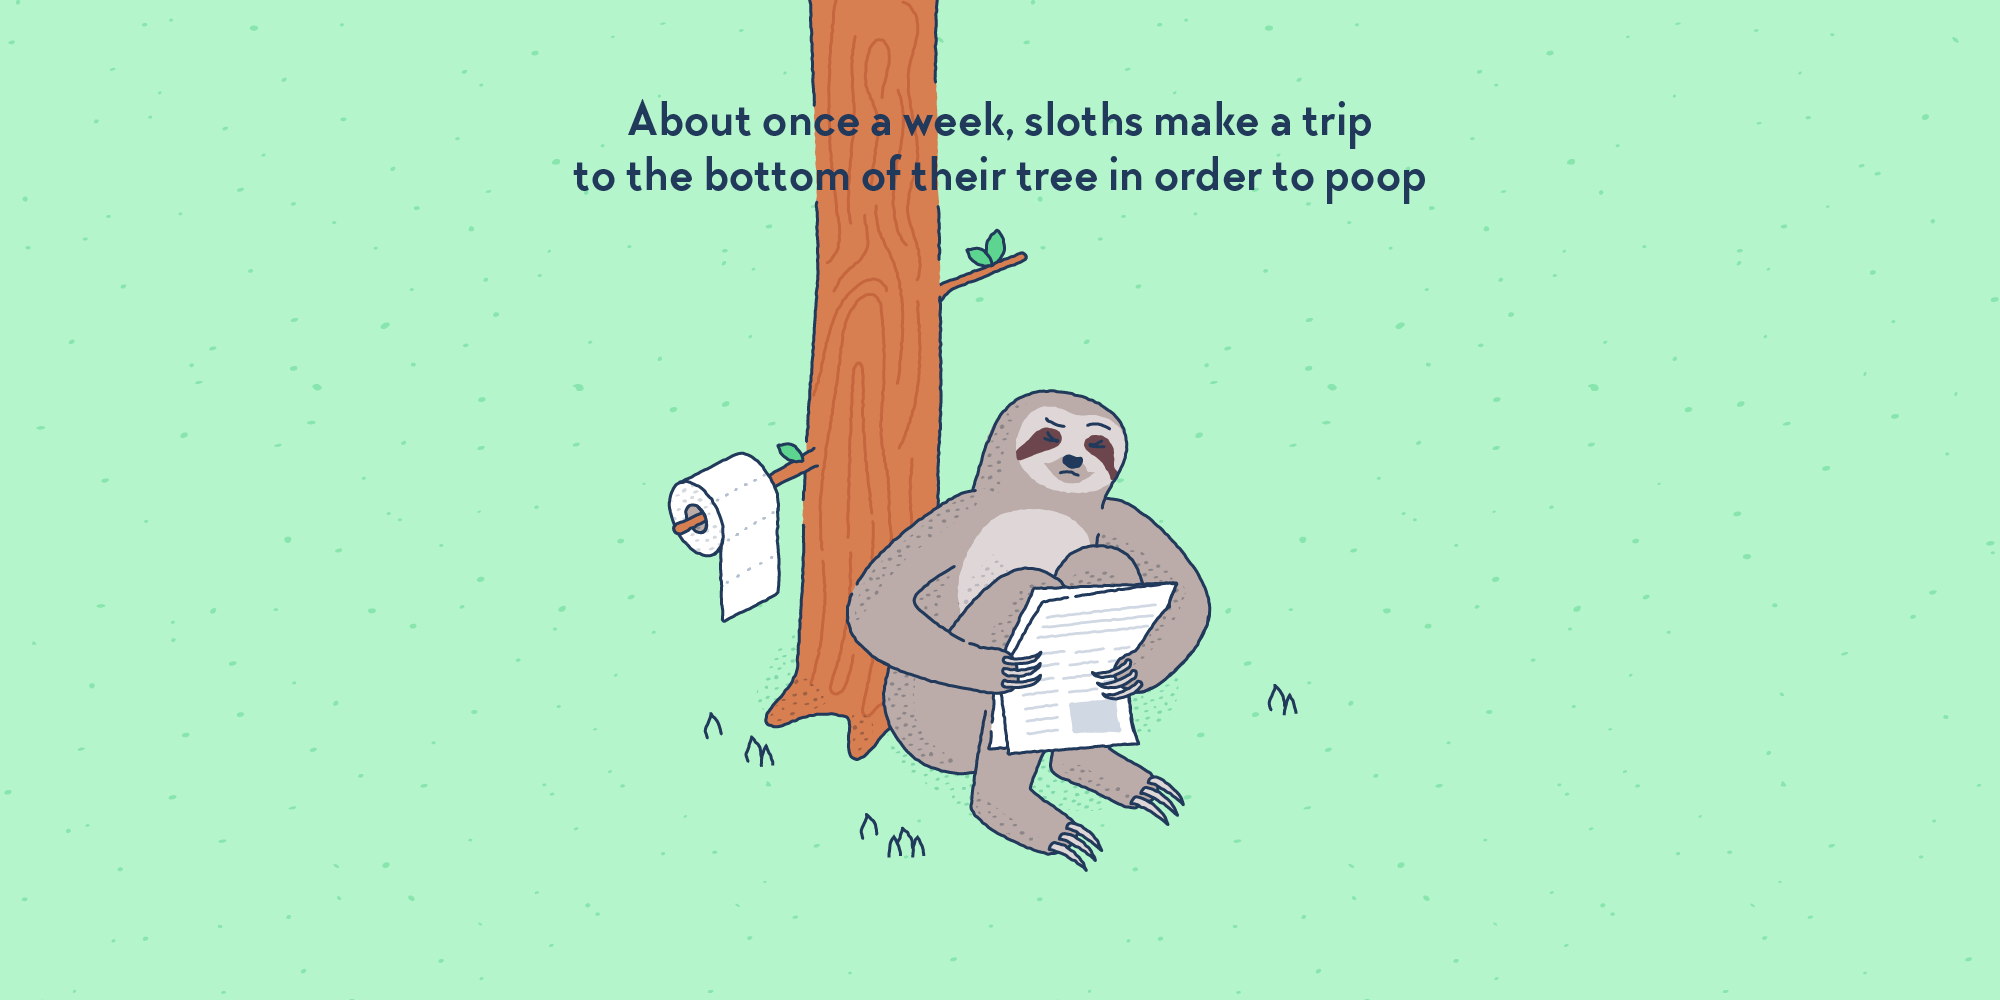 A sloth crouched at the bottom of a tree, reading a newspaper, a roll of toilet paper attached to a near branch.